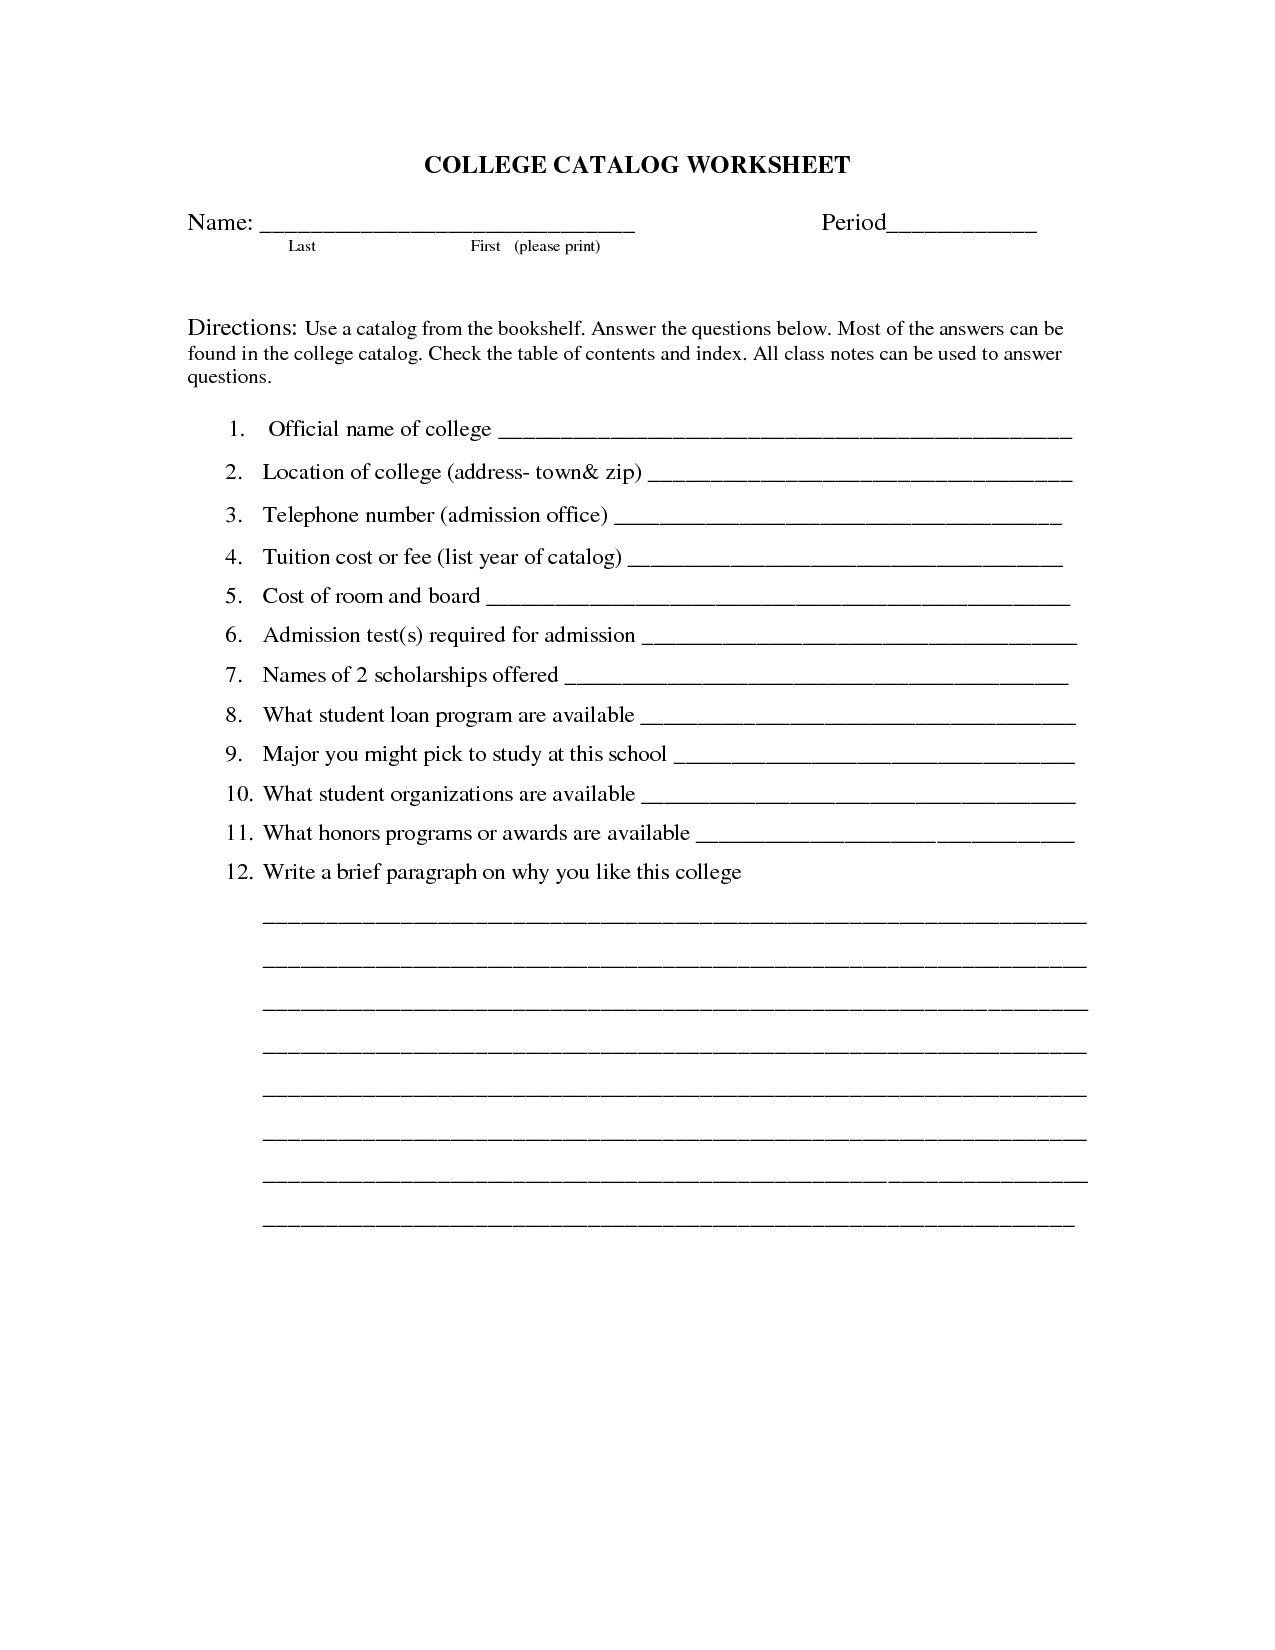 13-best-images-of-college-english-1-worksheets-vocabulary-worksheets-english-grammar